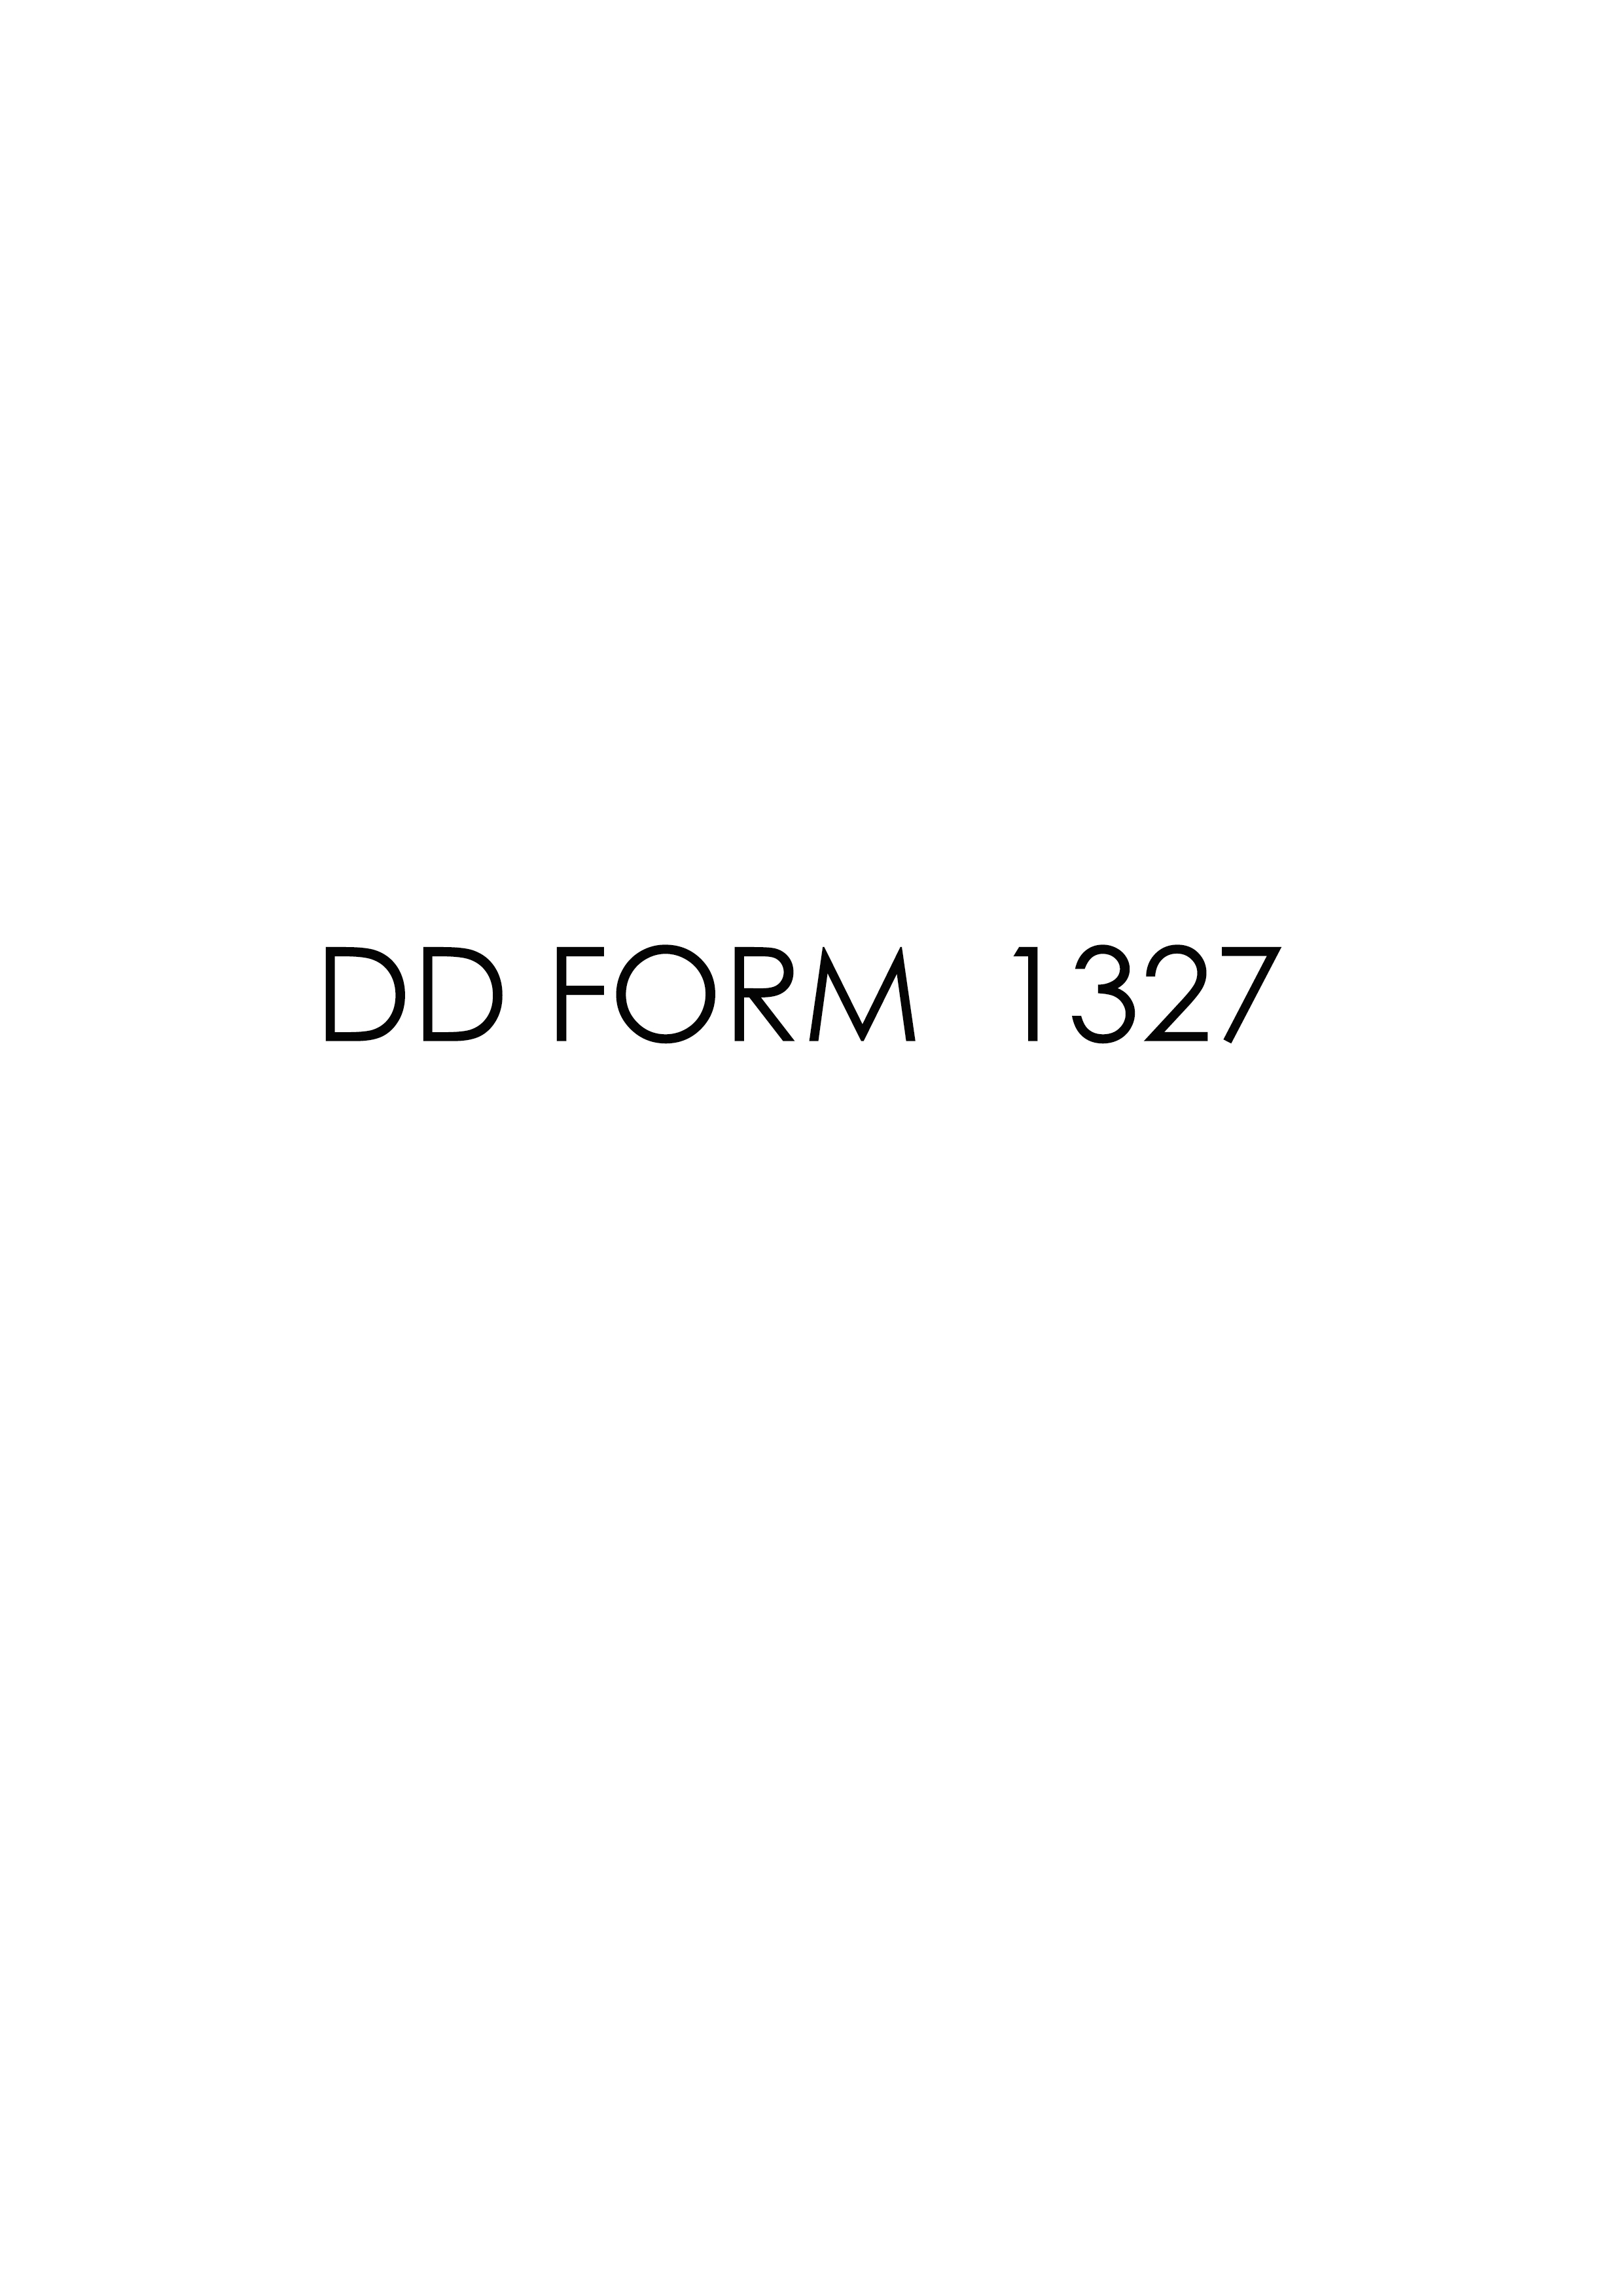 Download Fillable dd Form 1327